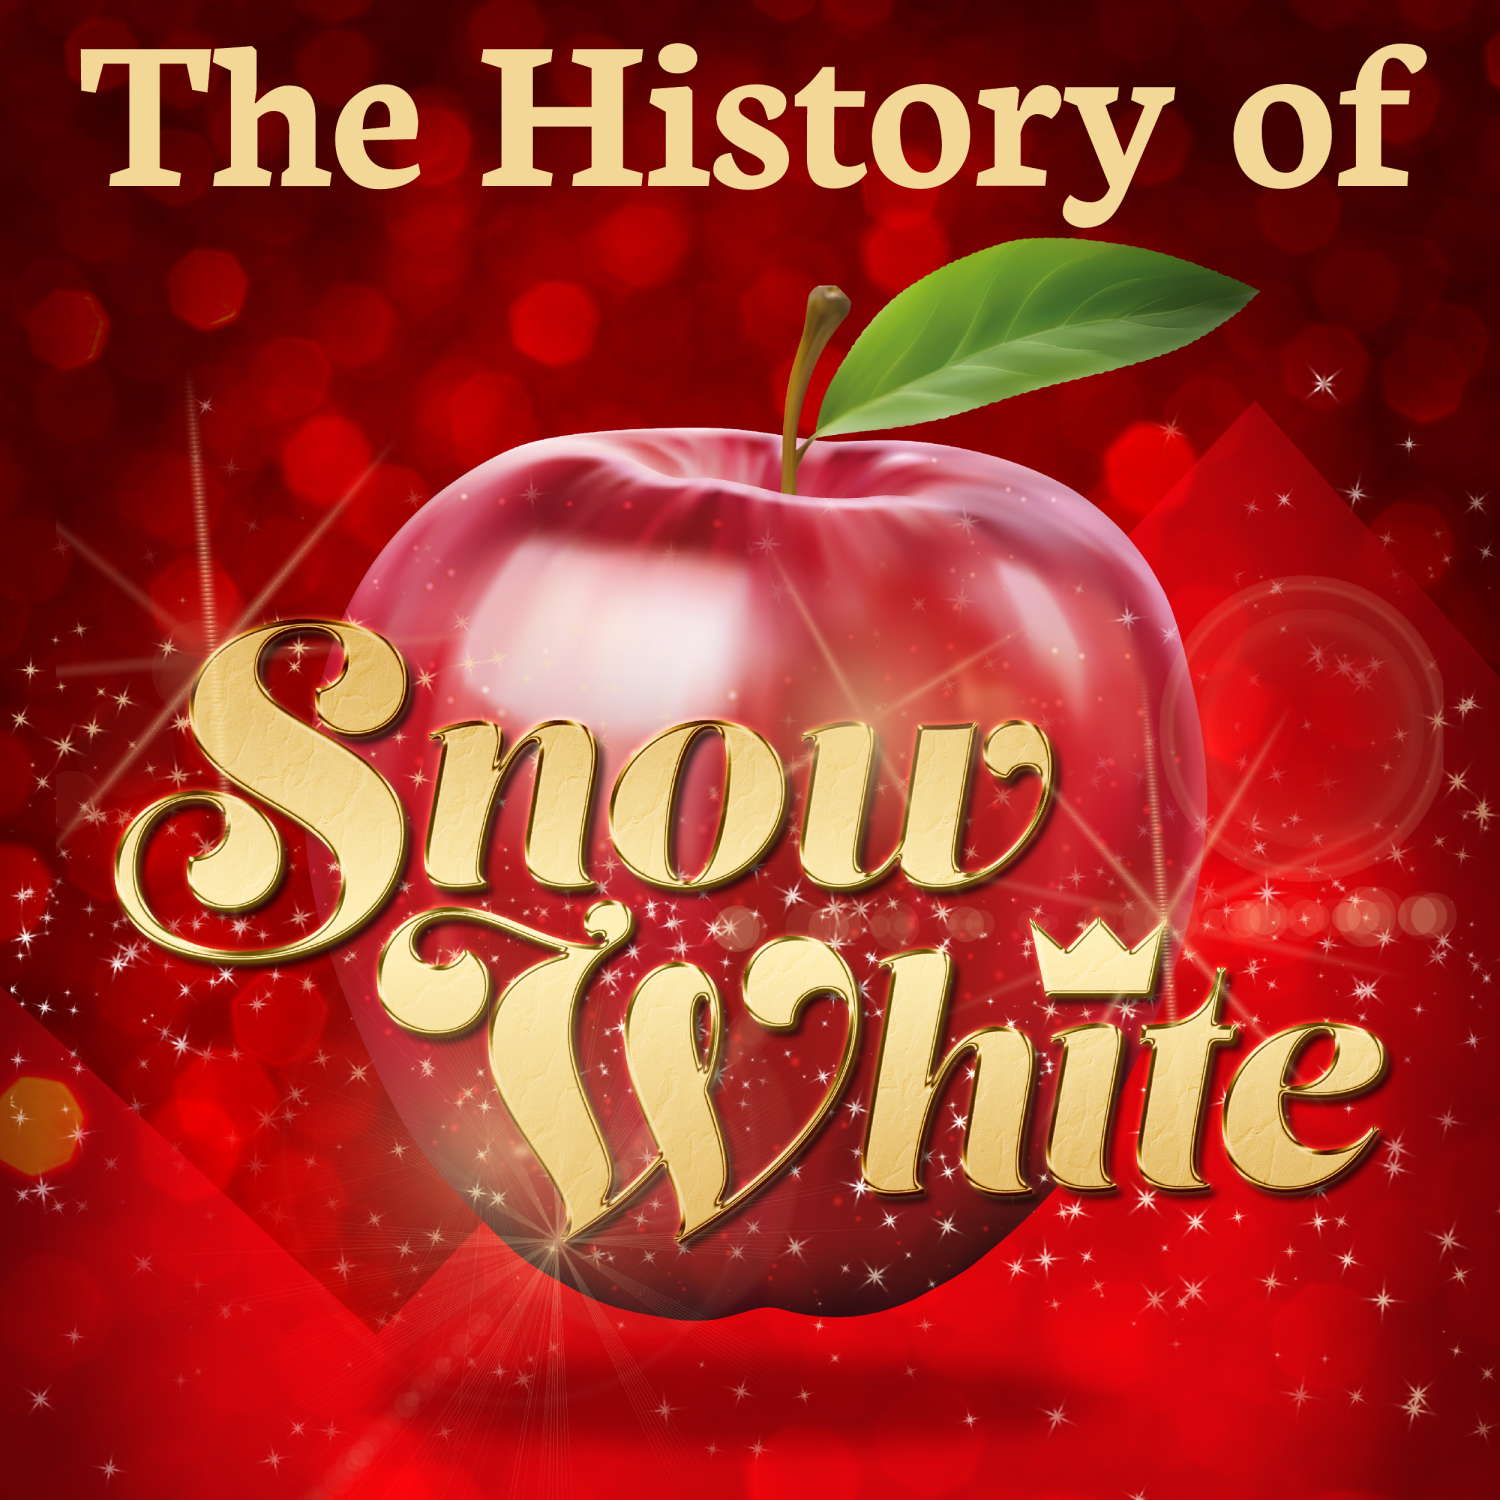 The History of Snow White